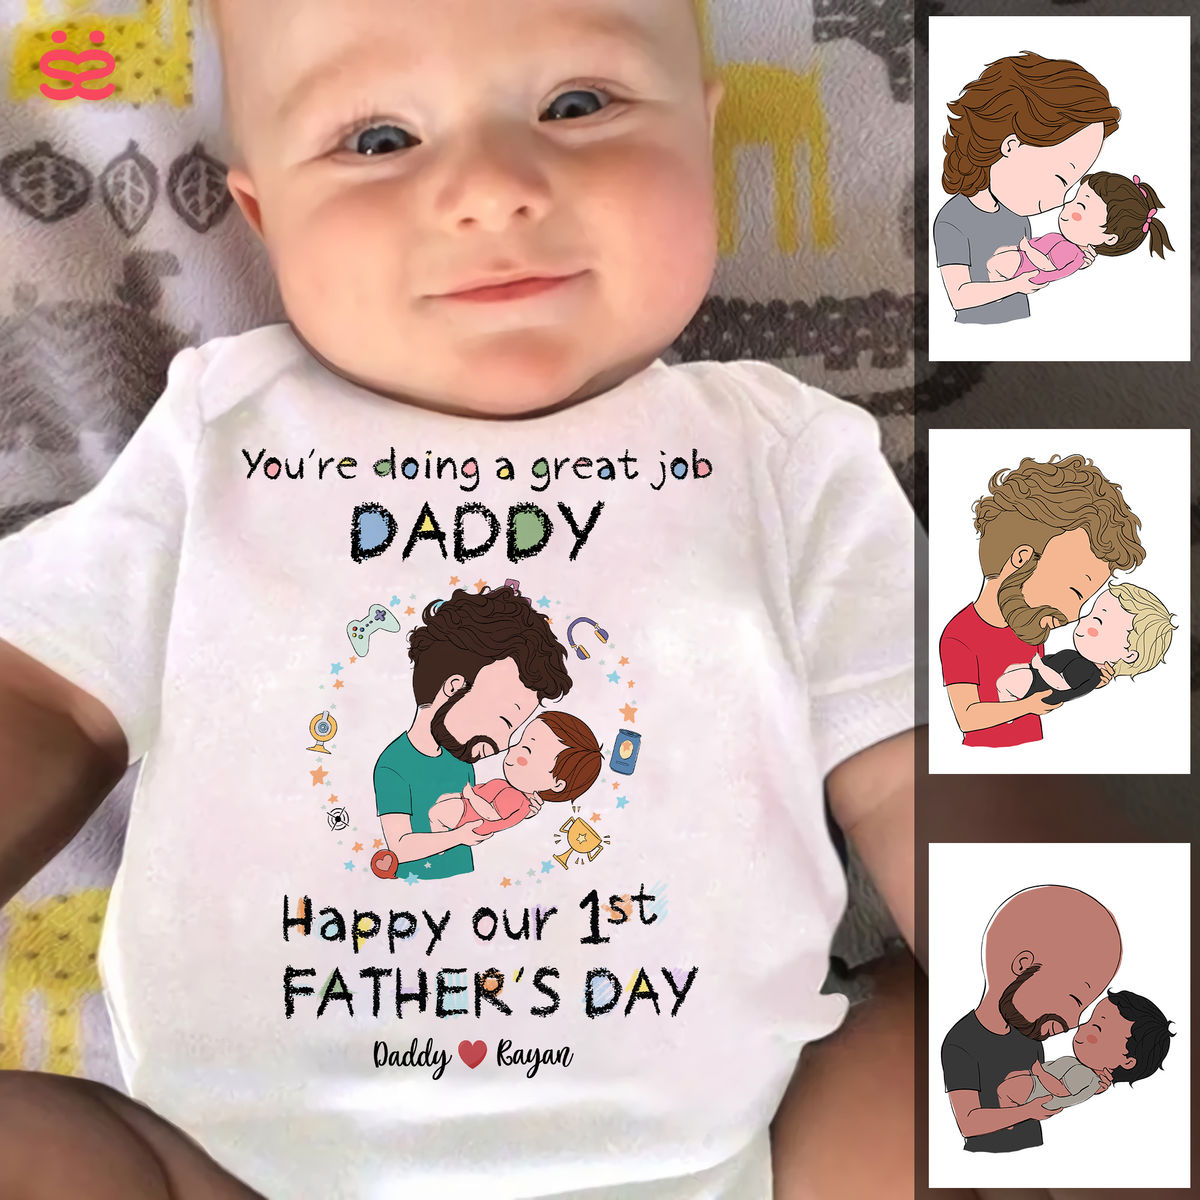 Personalized Shirt - Custom Baby Onesies - You're doing a great job daddy Happy 1st Father's Day - Baby Shower Gift